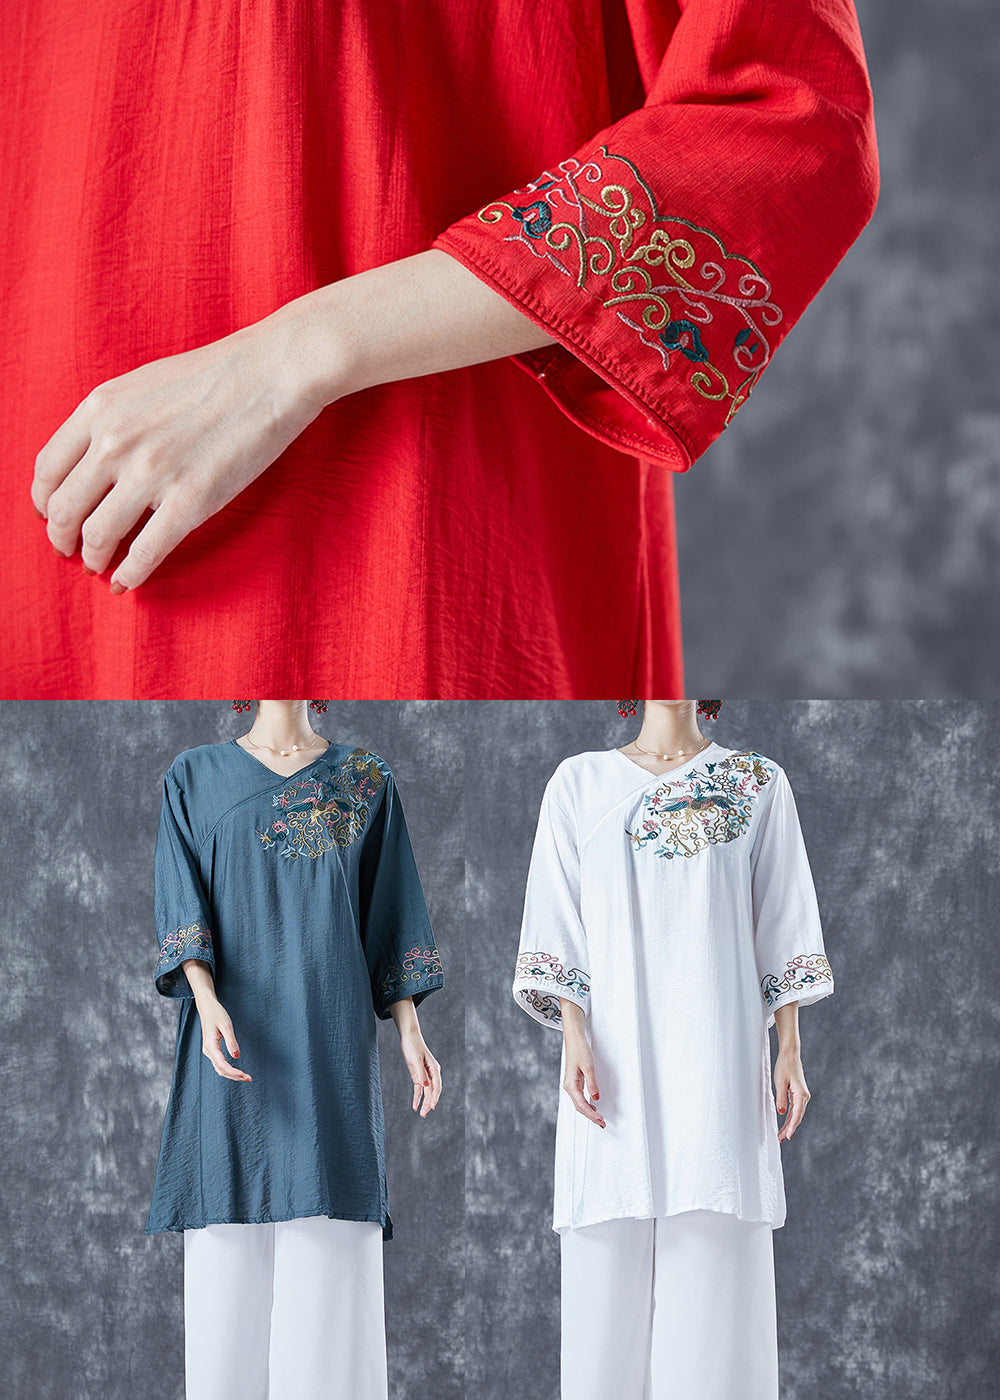 Women Red Embroideried Linen Party Dress Bracelet Sleeve LY5599 - fabuloryshop